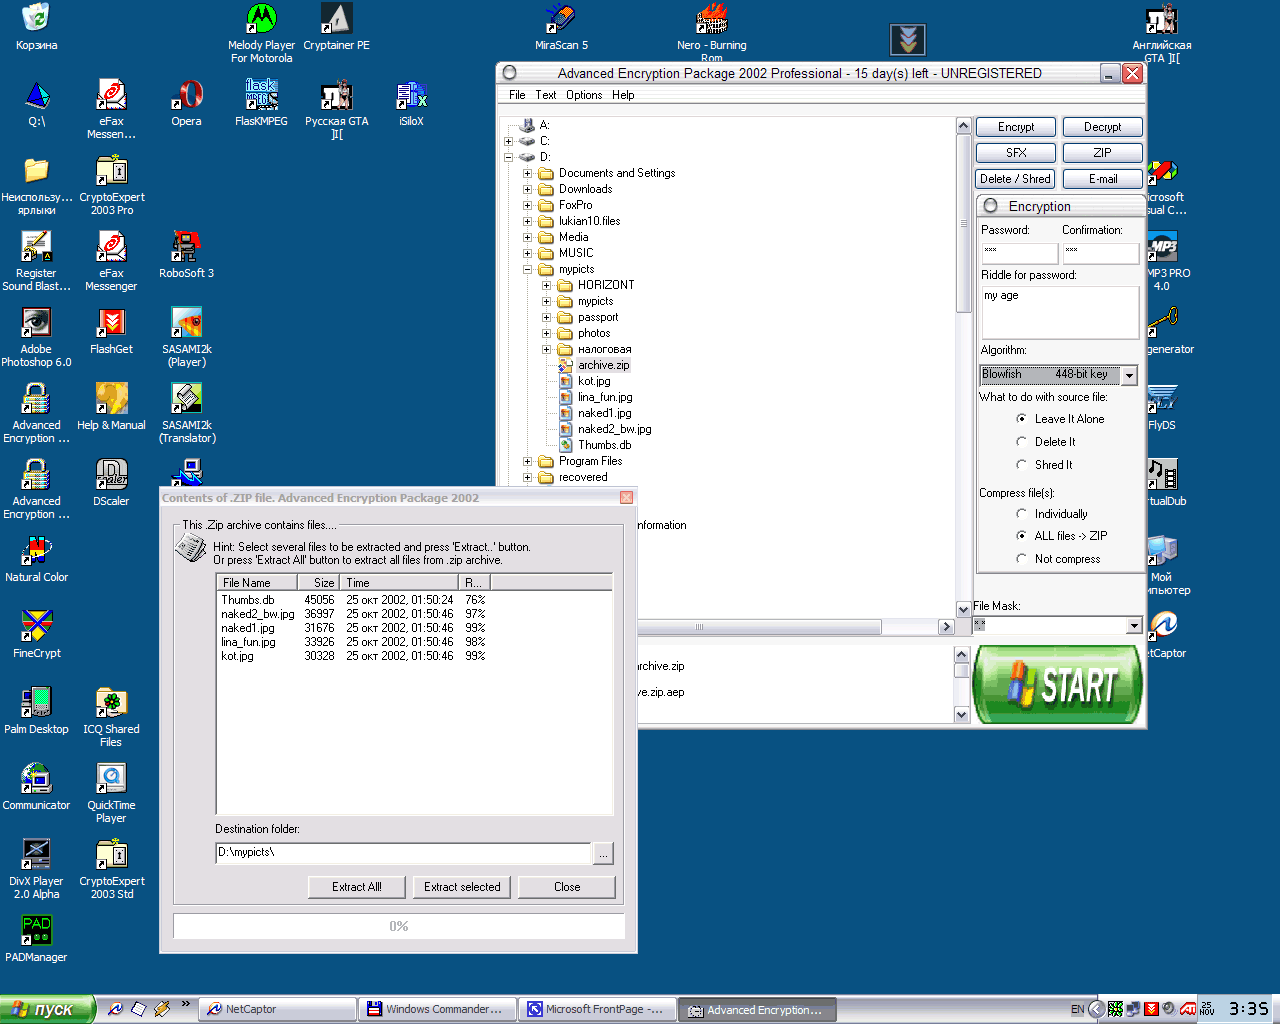 Advanced Encryption Package 2005